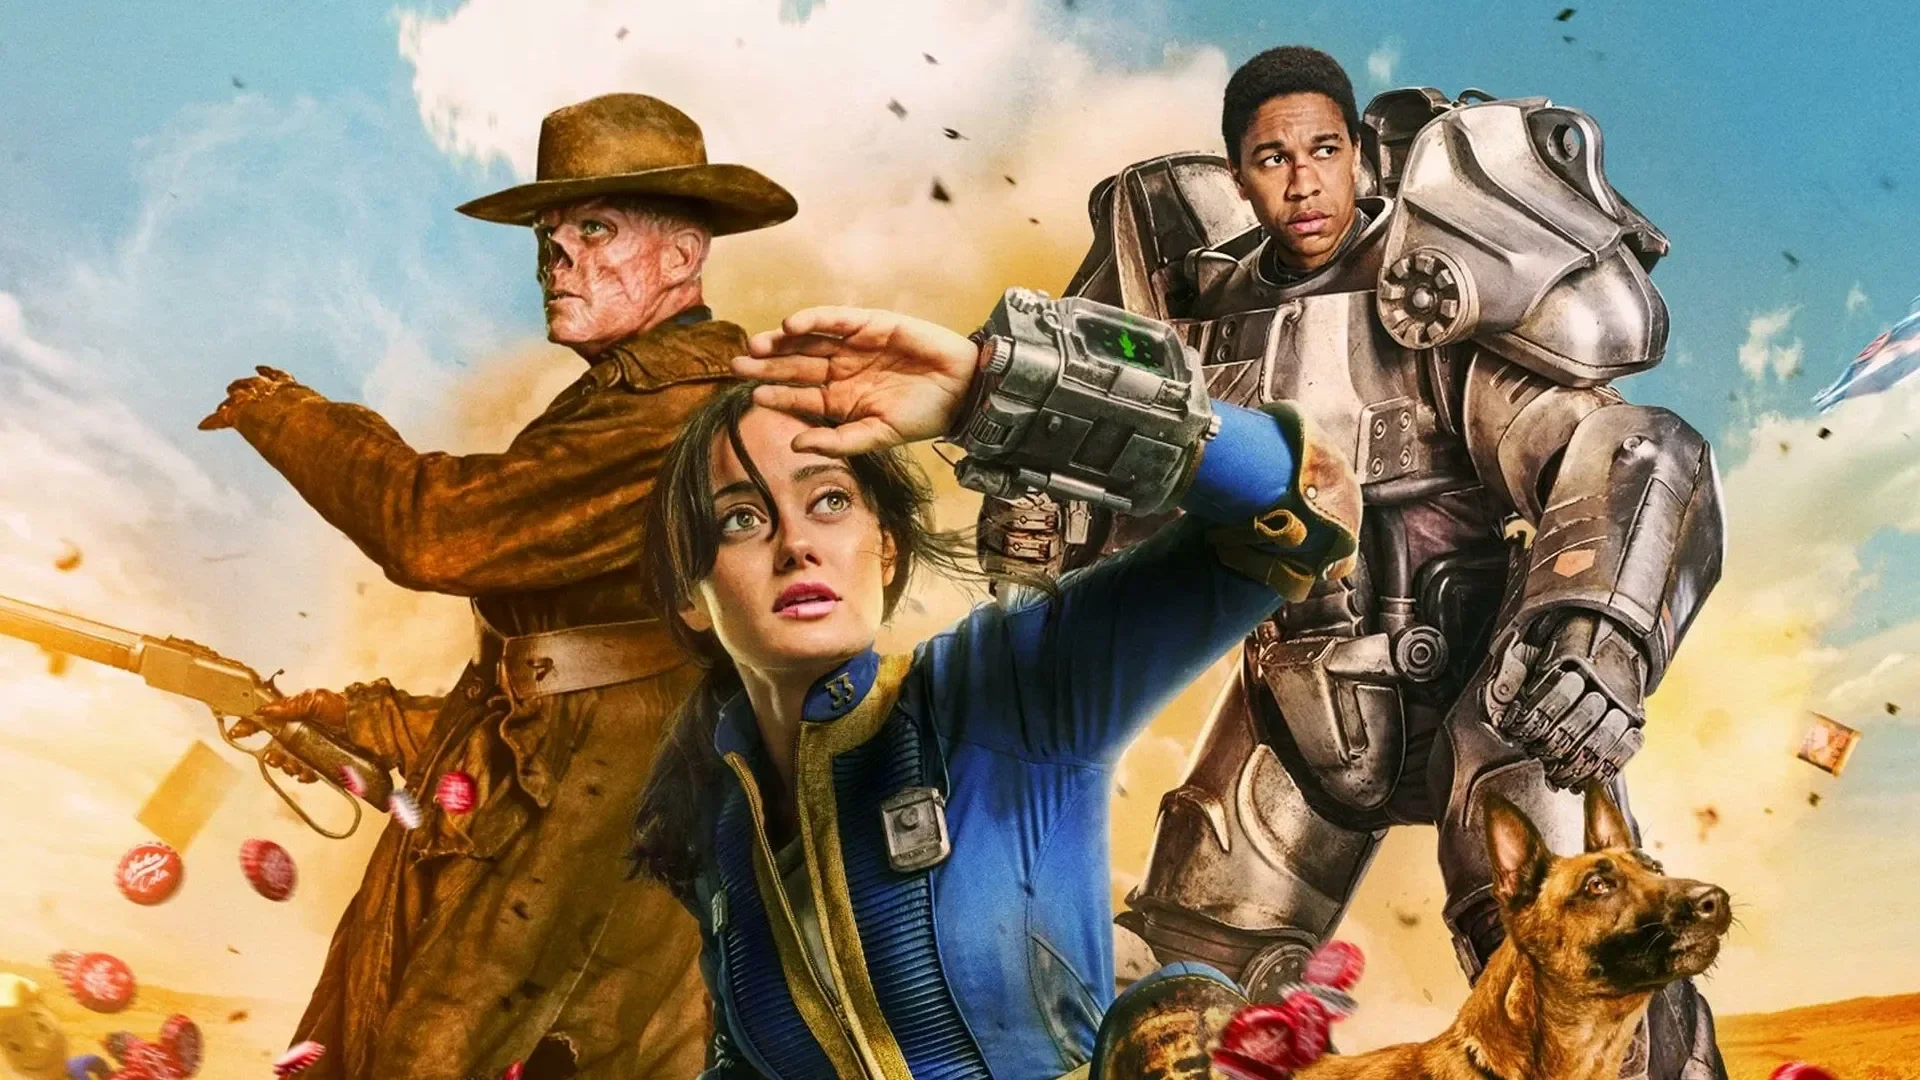 A small exclusive excerpt from the upcoming Fallout series has been posted online.